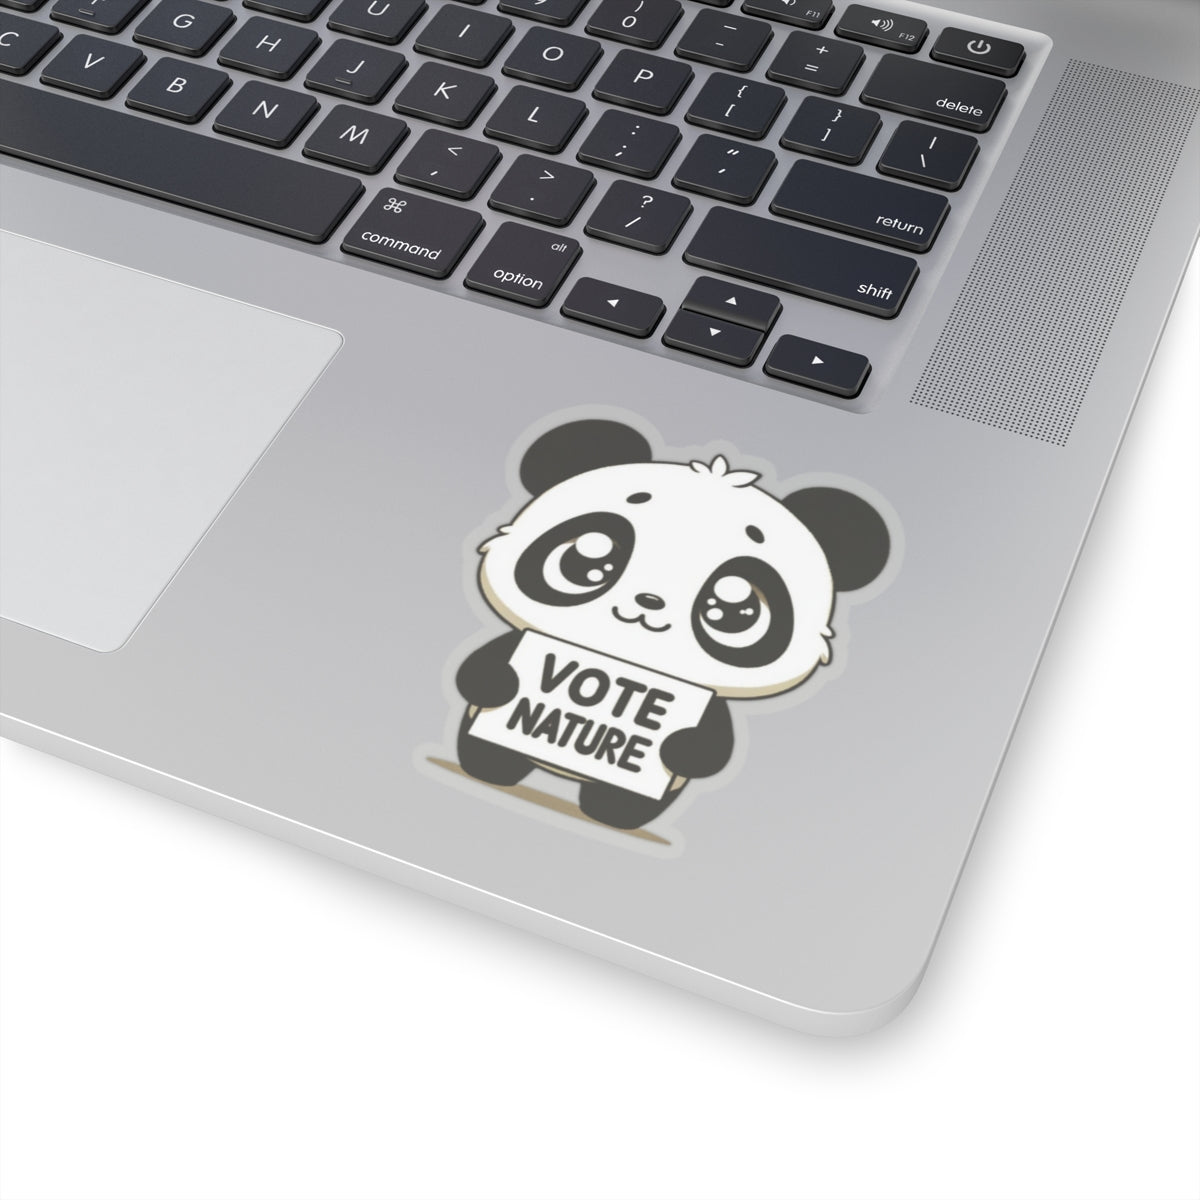 Inspirational Cute Panda Statement vinyl Sticker: Vote Nature! for laptop, kindle, phone, ipad, instrument case, notebook, mood board, wall